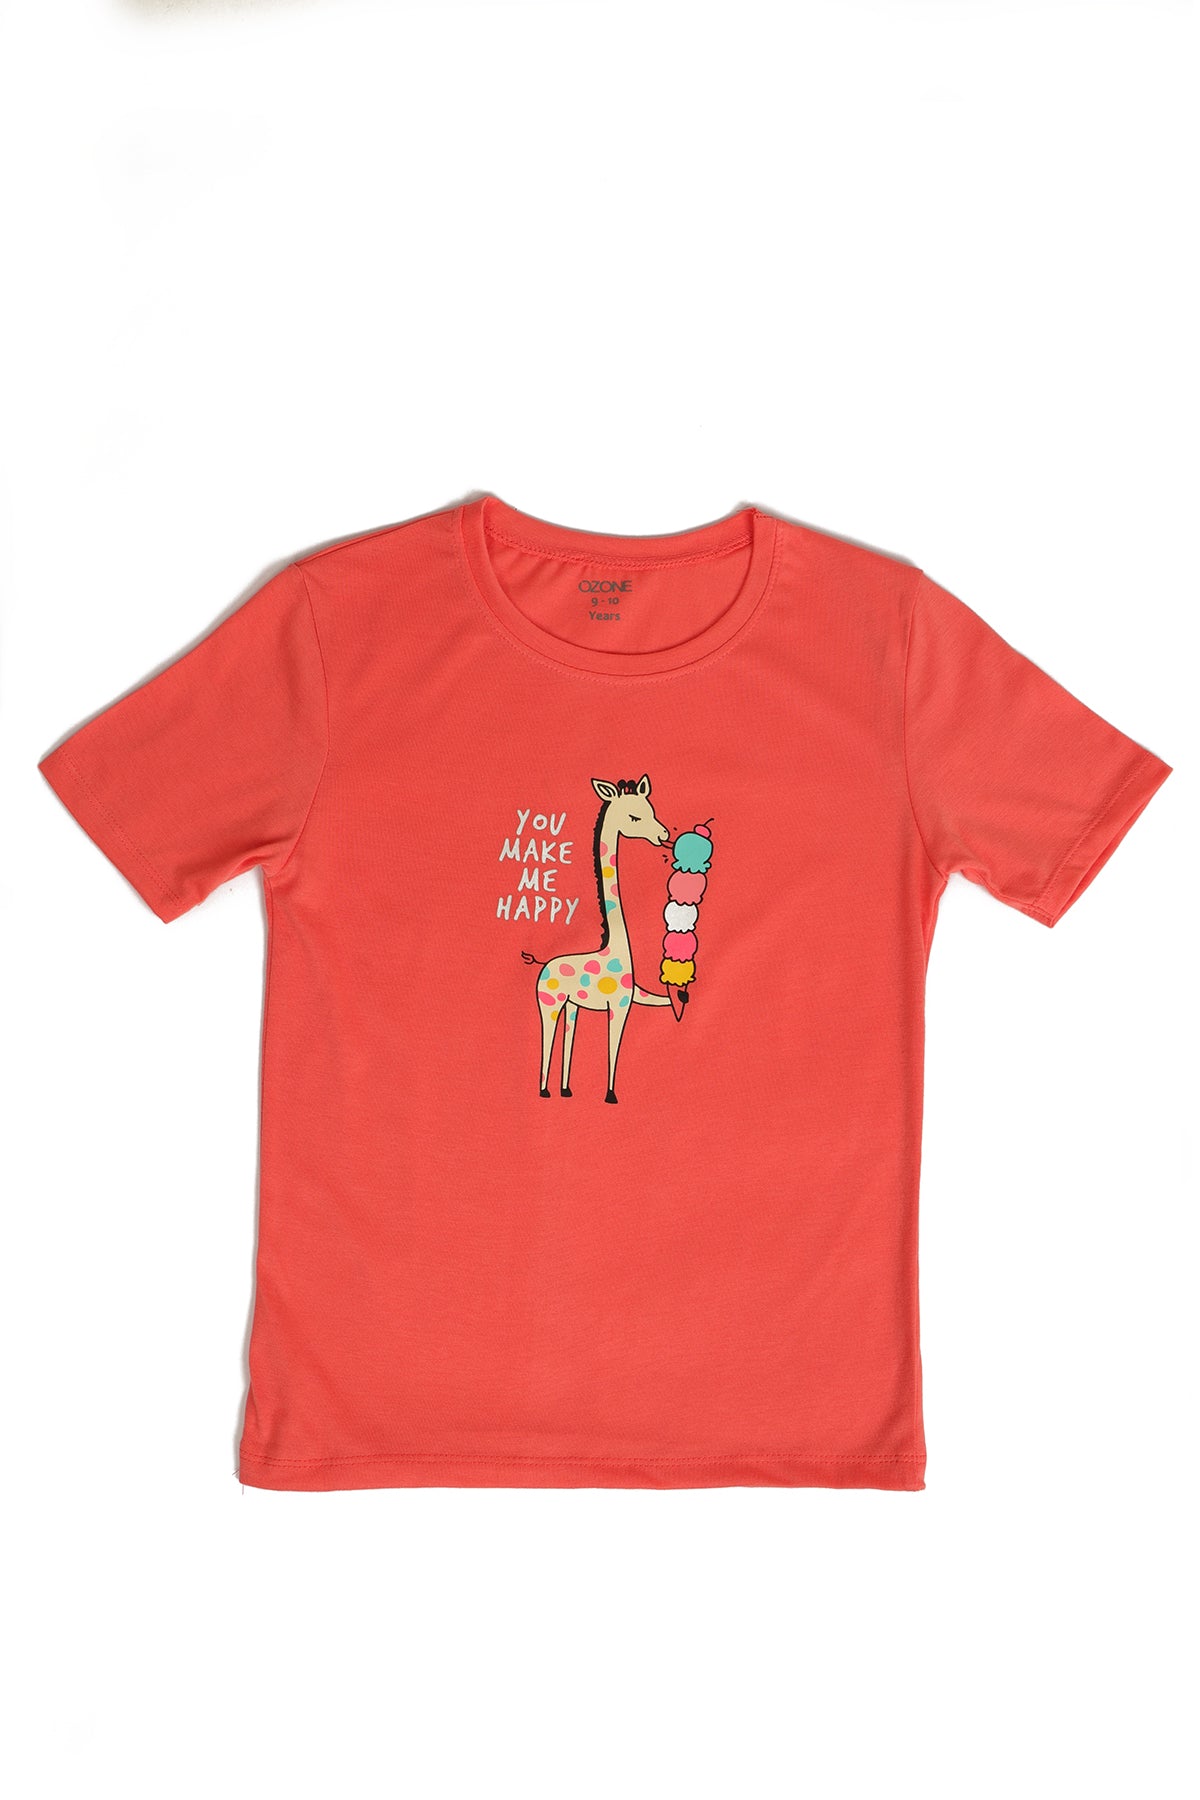 Ozone Kids Girls Without Collar Casual T-Shirt